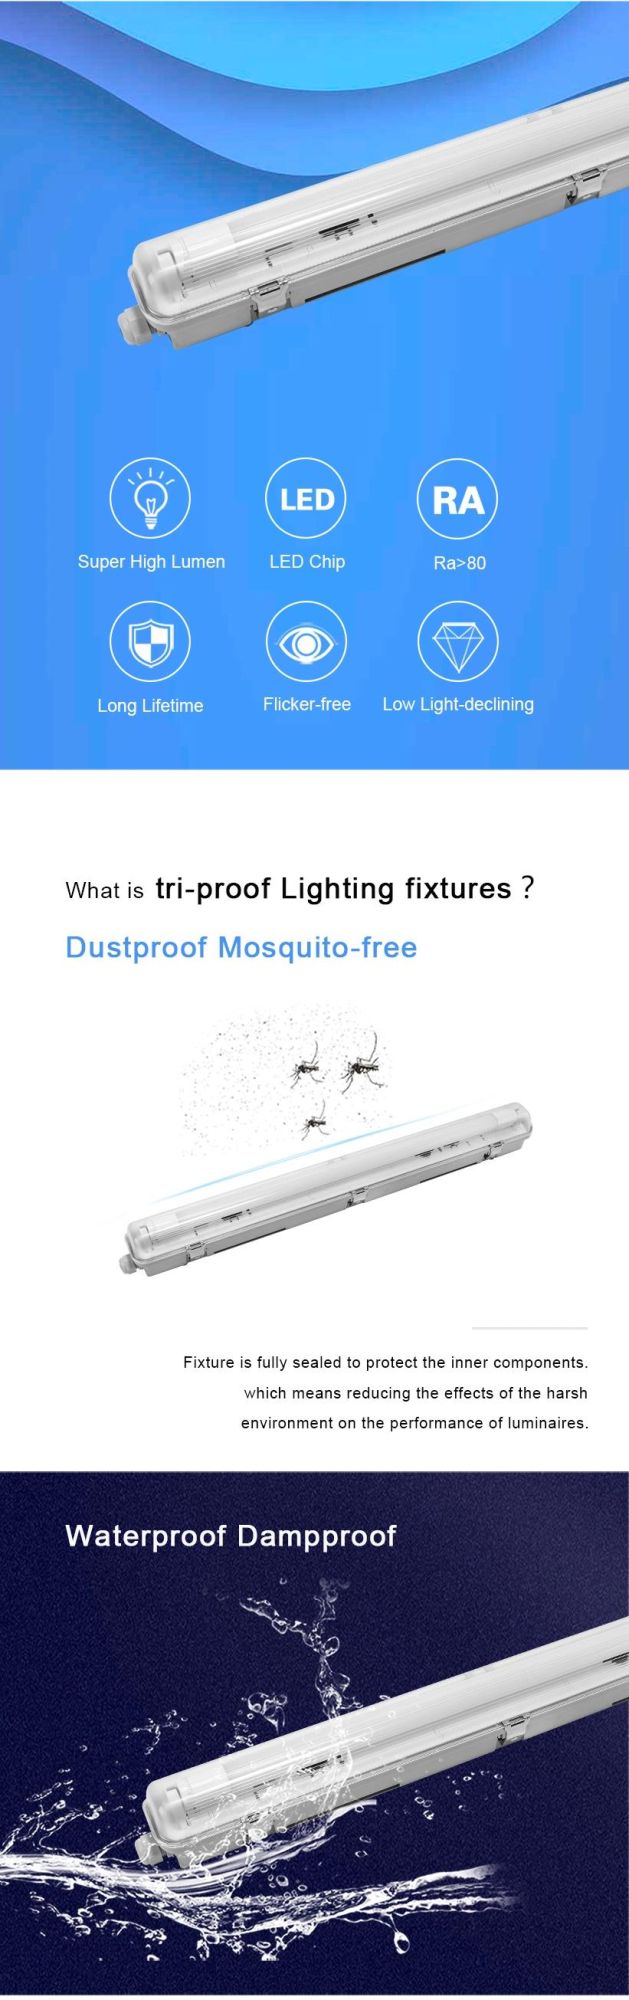 Economical IP65 Traditional Triproof Fixture Replacement for T8 LED Tubes 0.6m 1.2m 1.5m